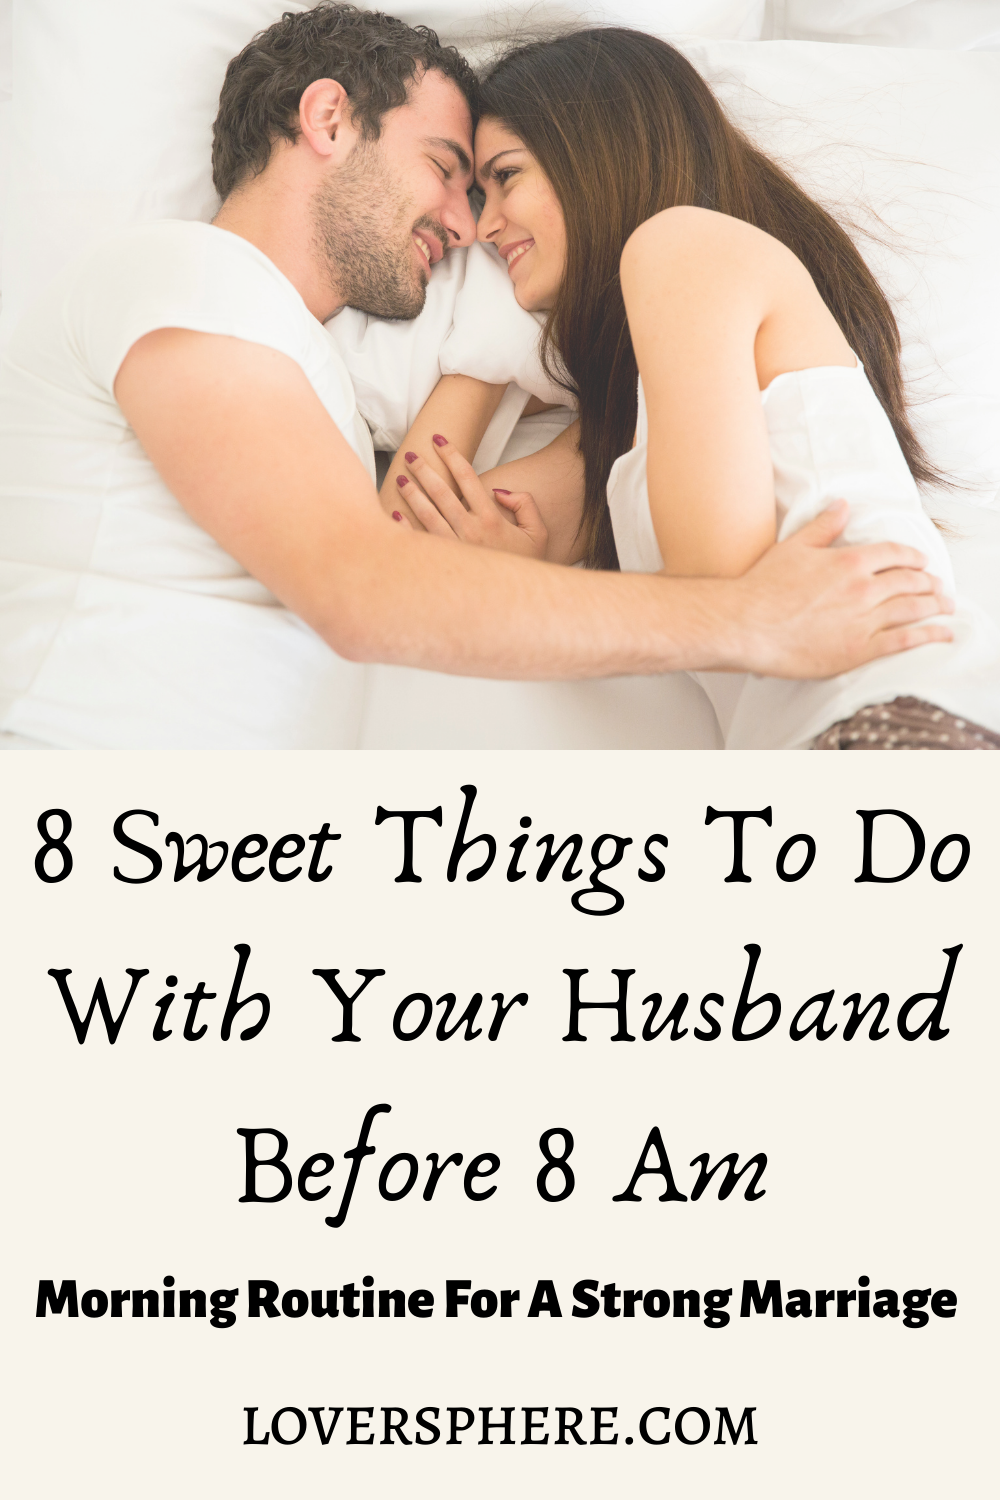 8 Things To Do With Your Spouse Before 8 Am For Greater Intimacy